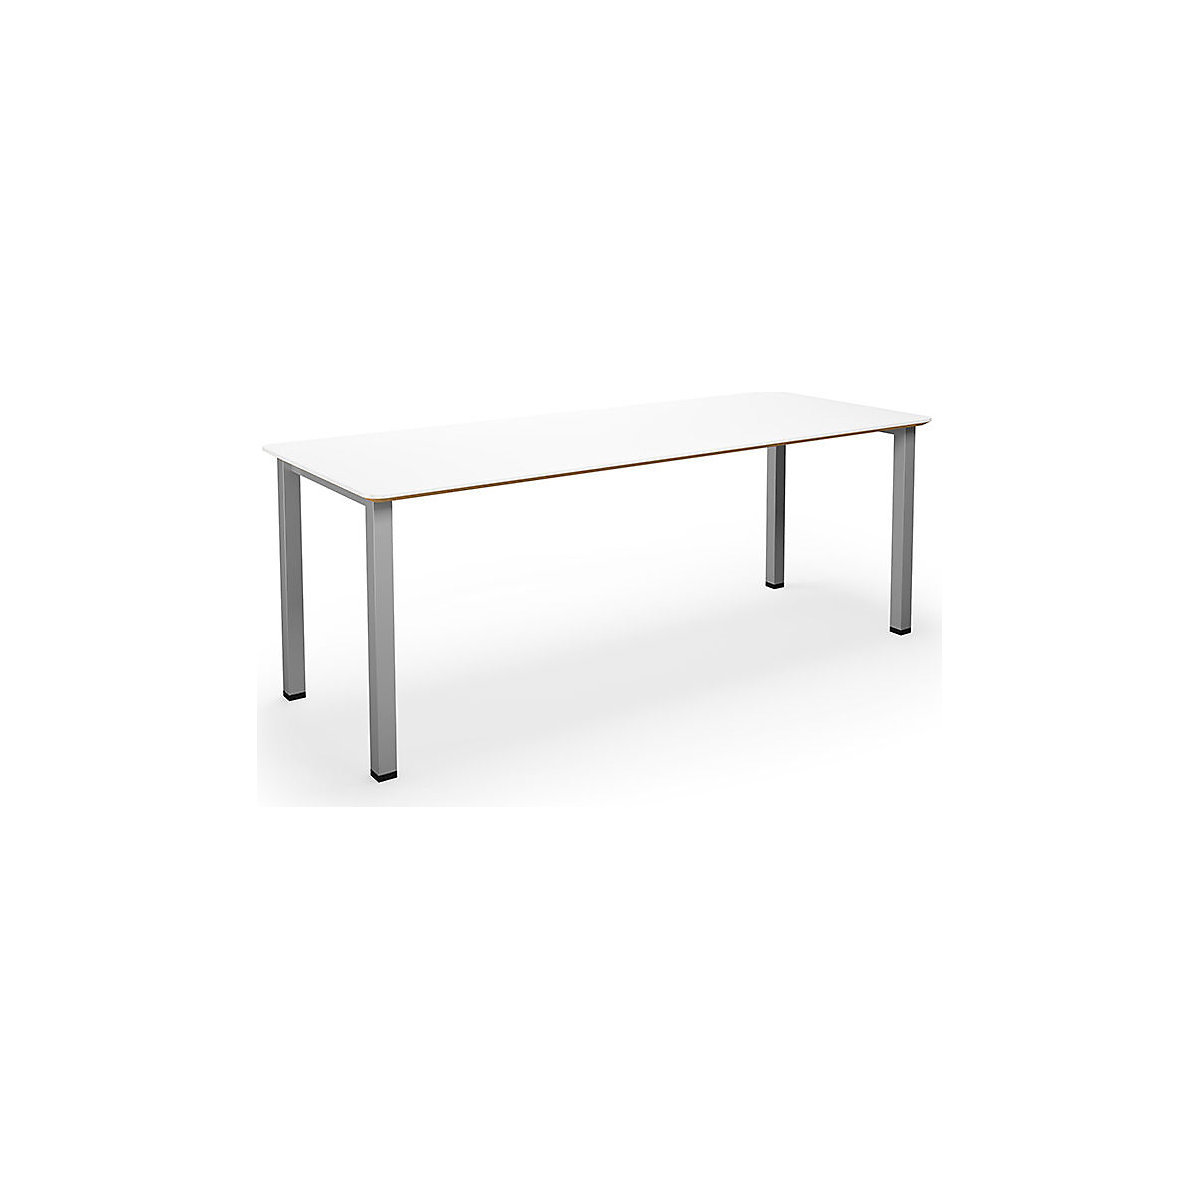 DUO-U Trend multi-purpose desk, straight tabletop, rounded corners, WxD 2000 x 800 mm, white, silver-5